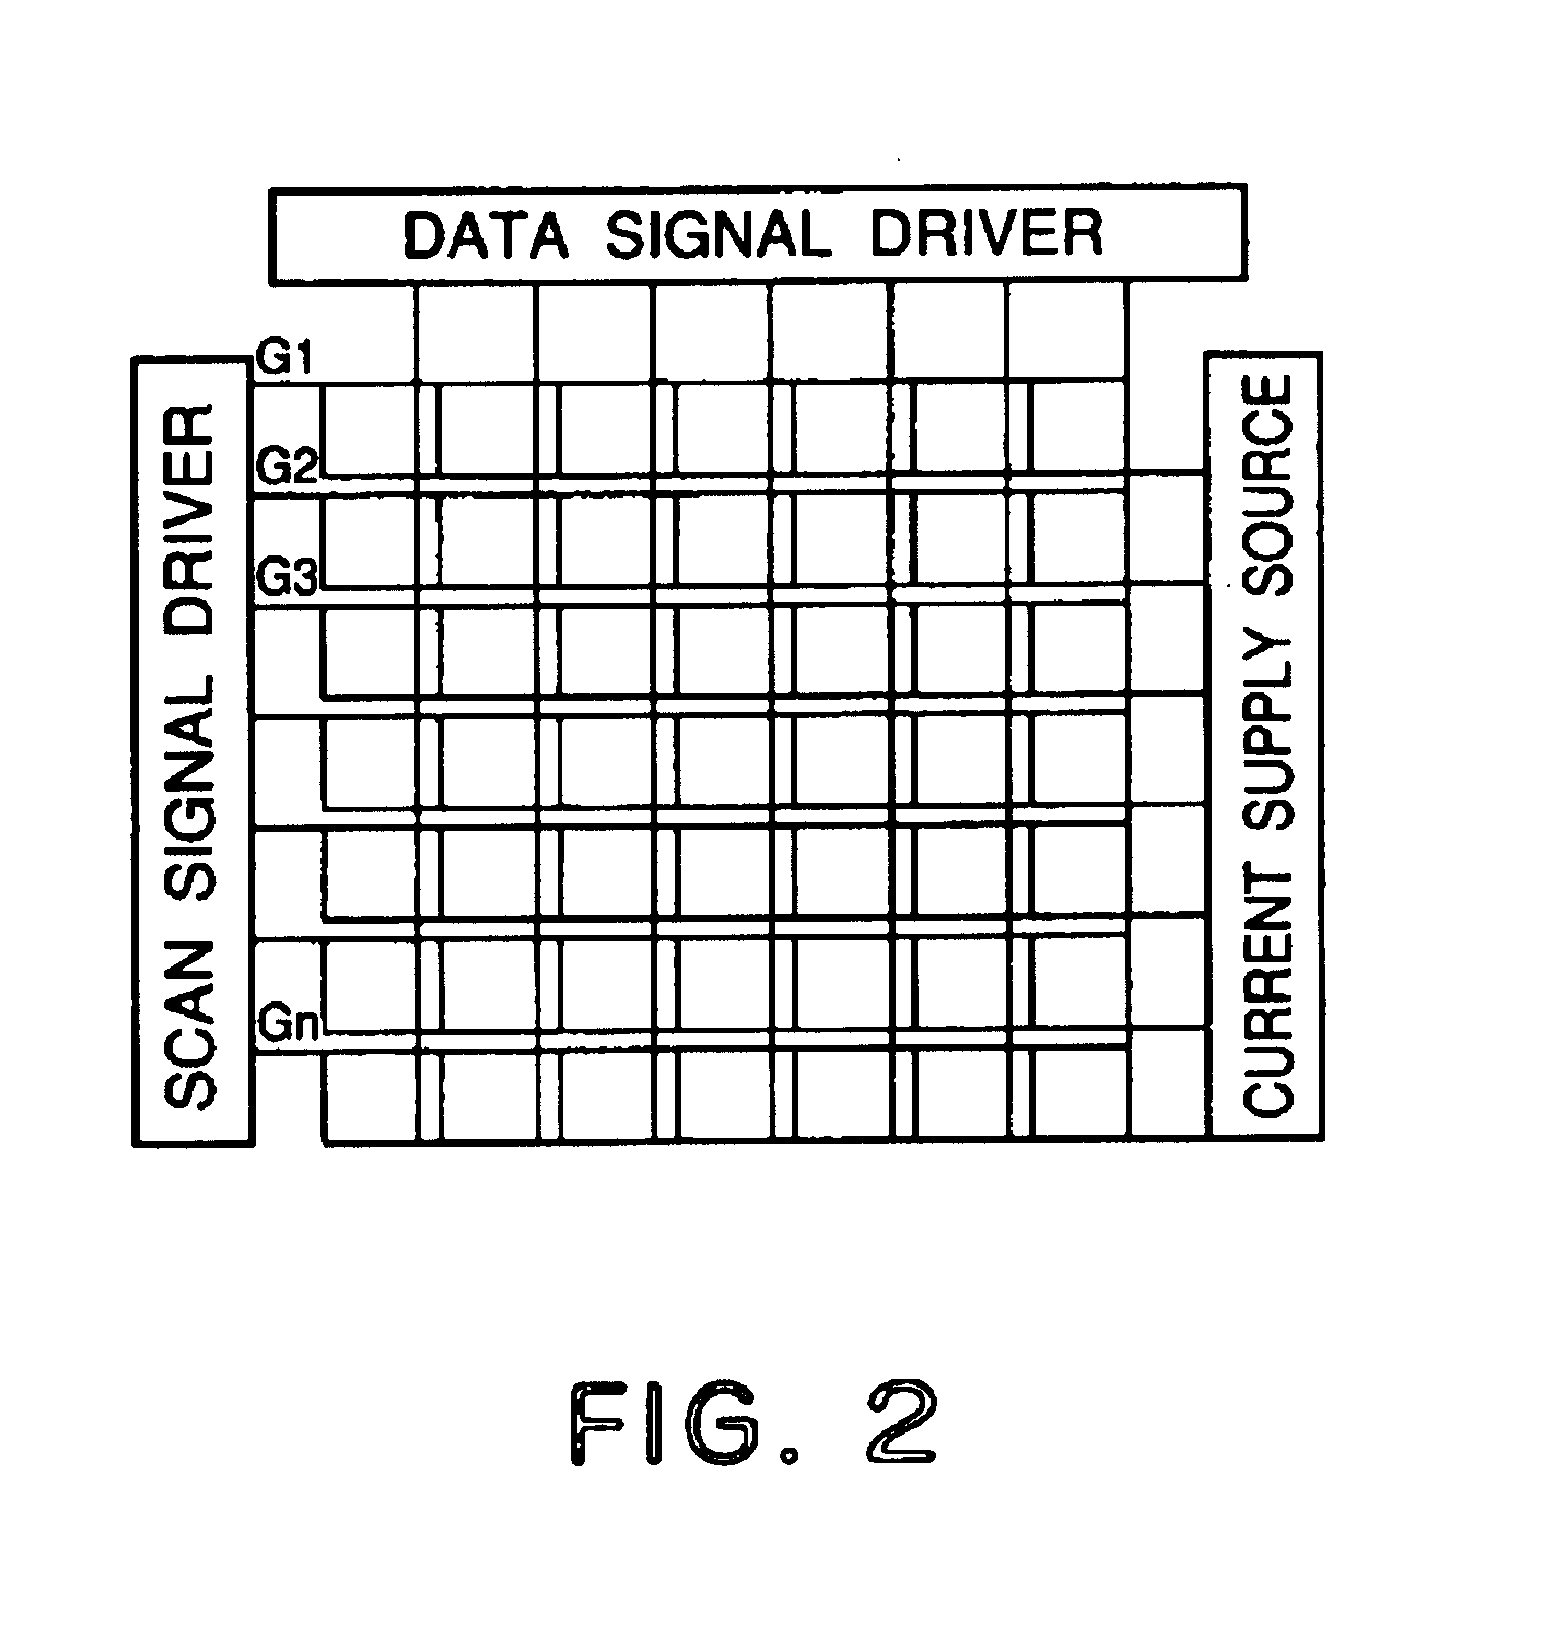 Metal coordination compound, luminescence device and display apparatus